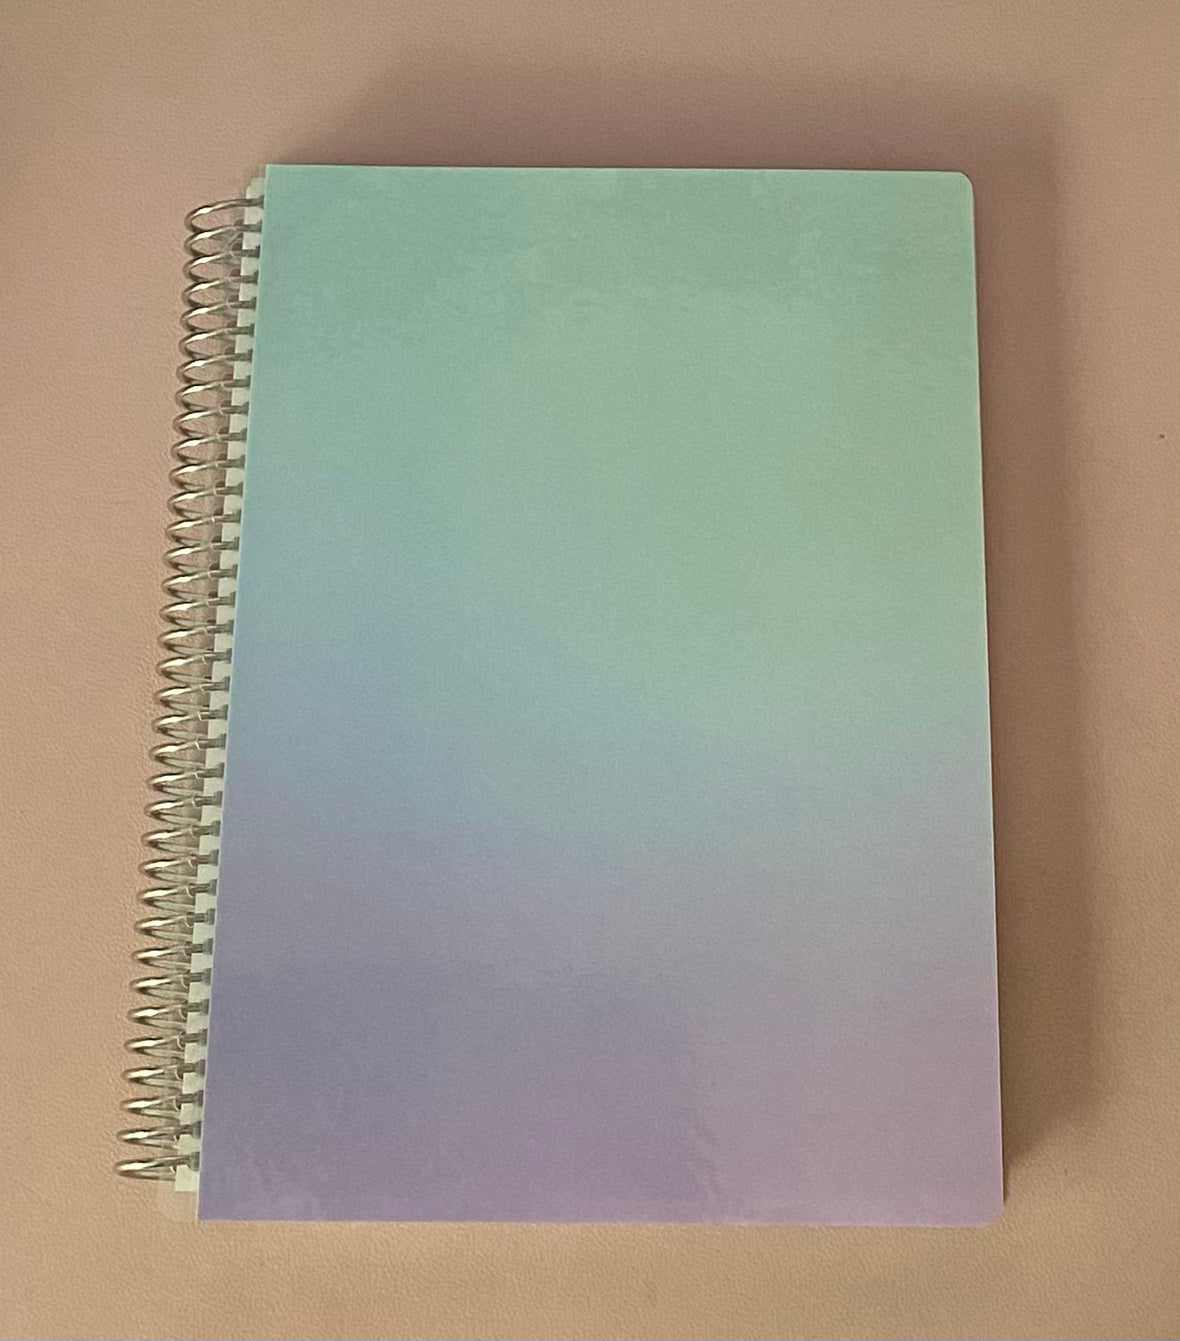 Lined Notebook: Purple and Blue Ombre - By When? Planner Co.